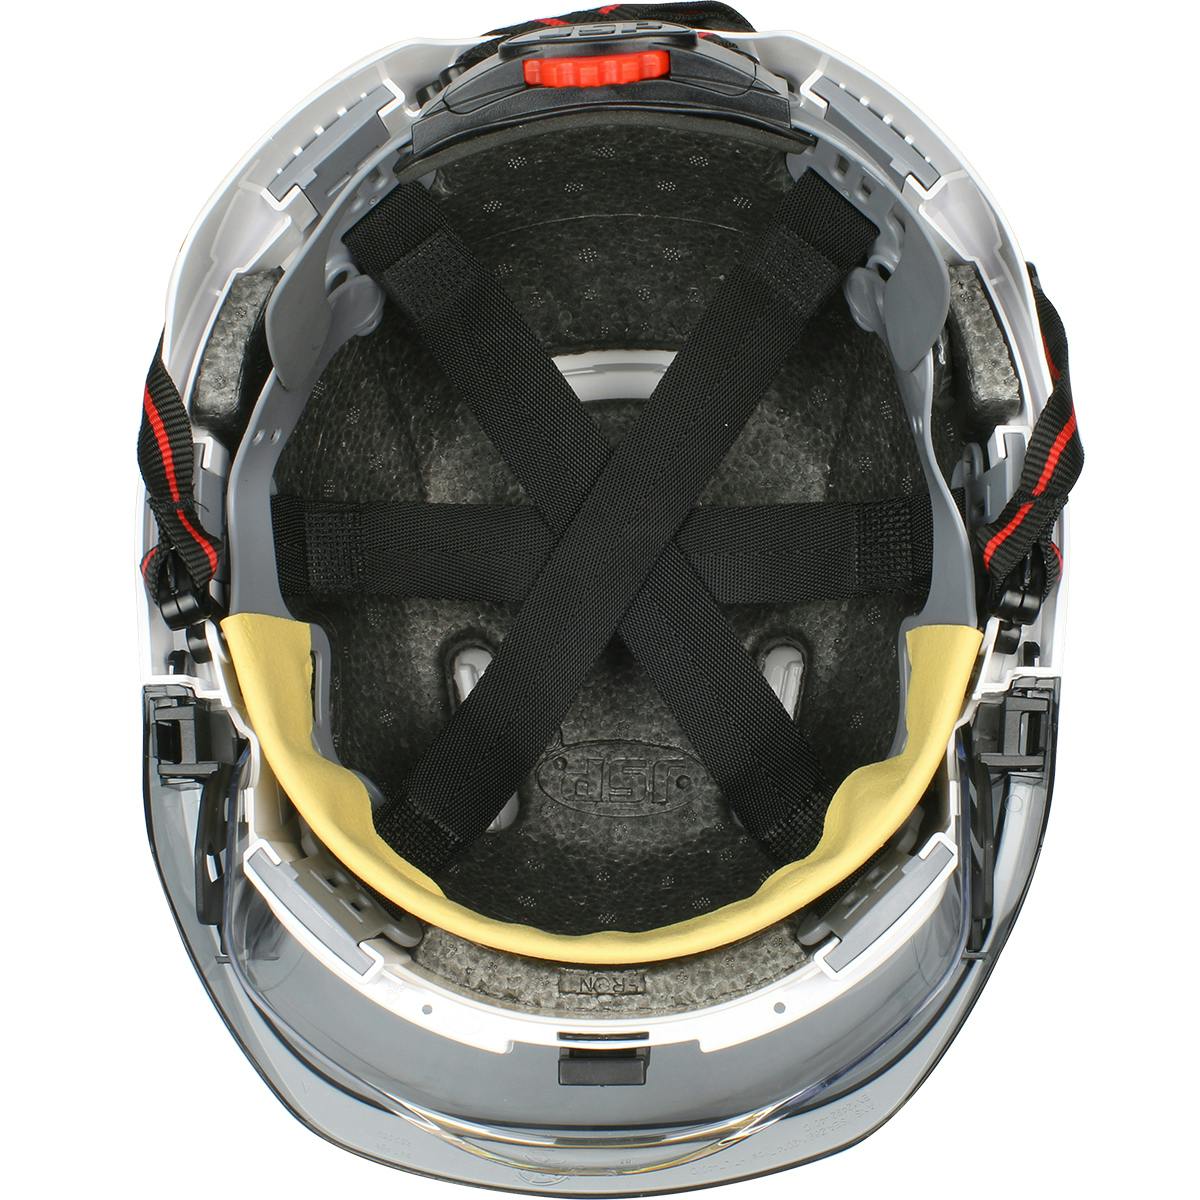 Type I, Non-vented Industrial Safety Helmet with fully adjustable four point chinstrap, Lightweight ABS Shell, Integrated Faceshield, 6-Point Polyester Suspension and Wheel Ratchet Adjustment, White-Smoke (280-EVSN-CH) - OS_3